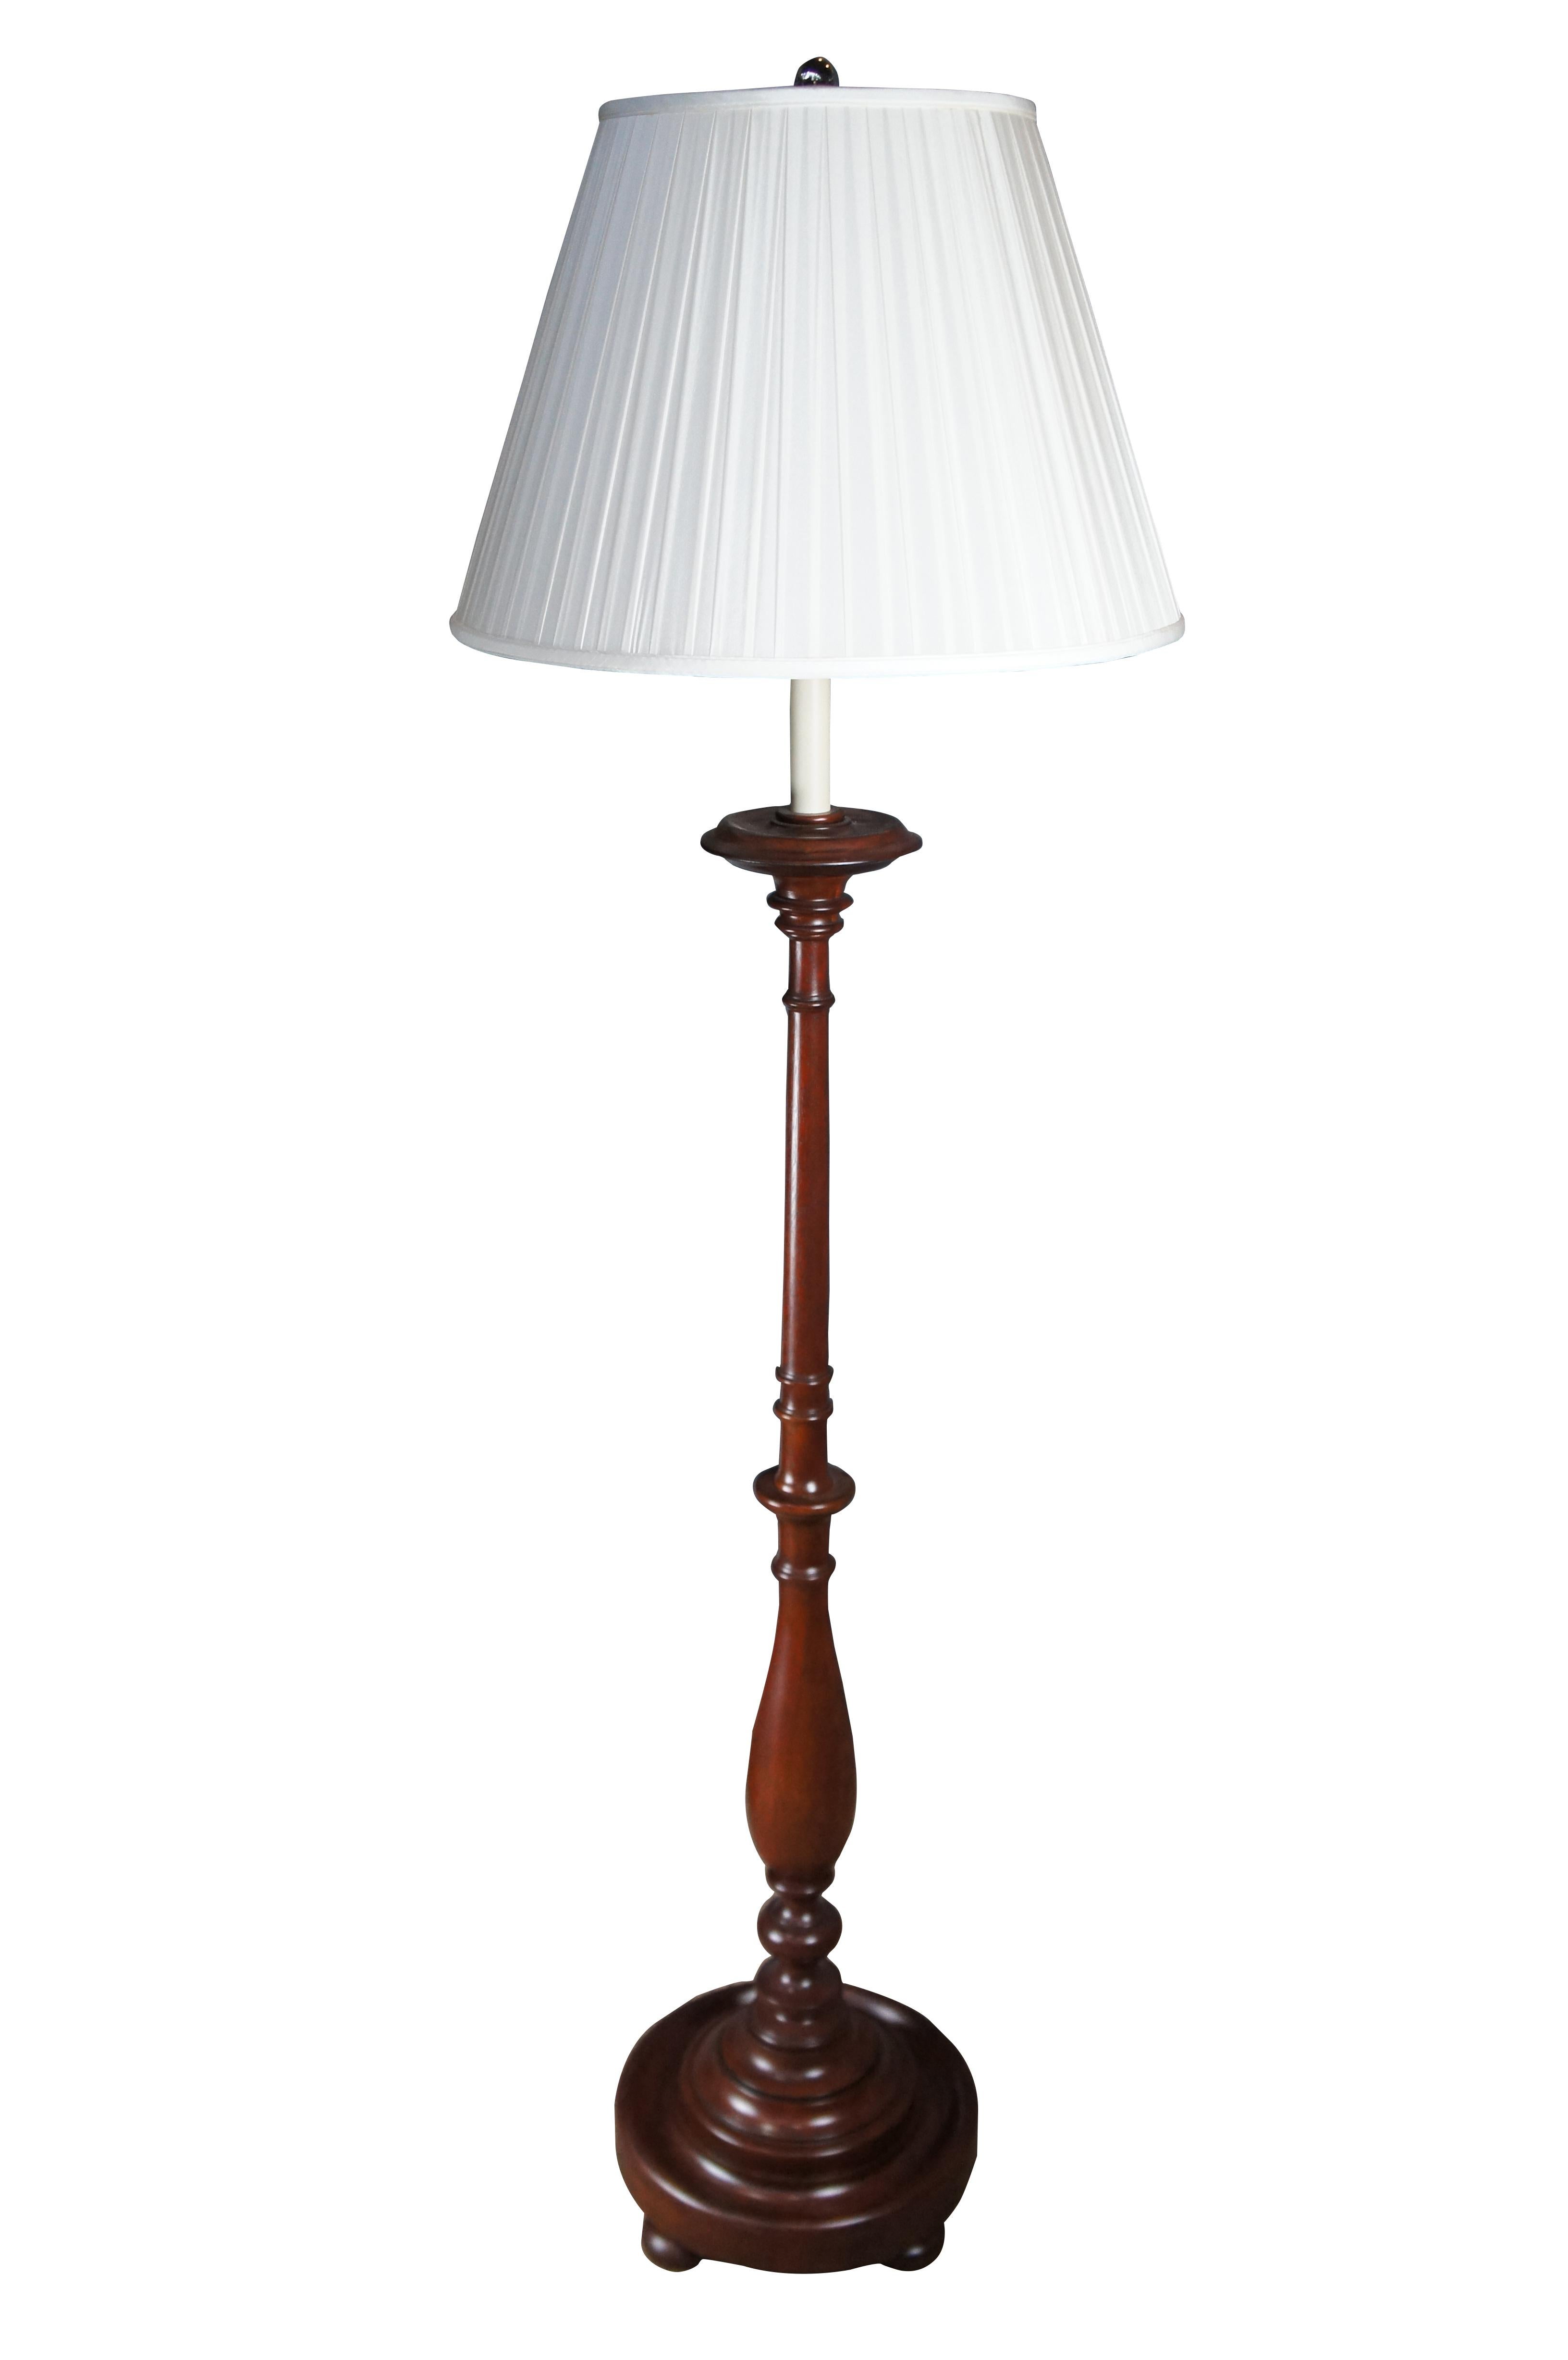 A traditional rich brown mahogany floor lamp by Ralph Lauren. The lamp is in the form of a large Early American / Colonial candle stand with candlestick center and adjustable harp allowing the shade to be raised / lowered. Features a baluster turned